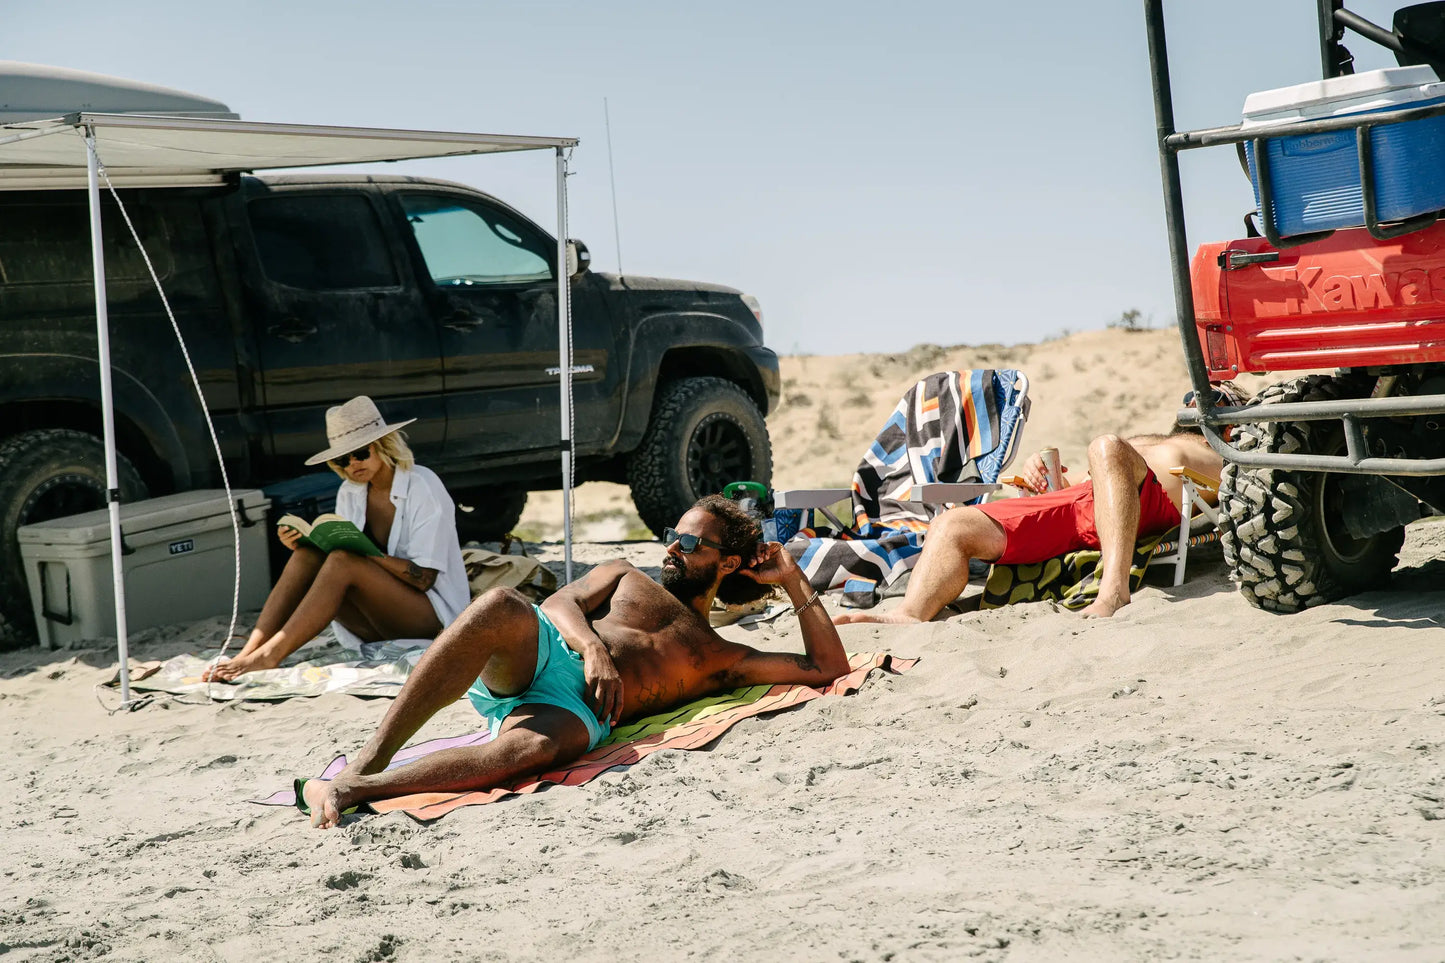 Friends laying on a beach next to vehicles.